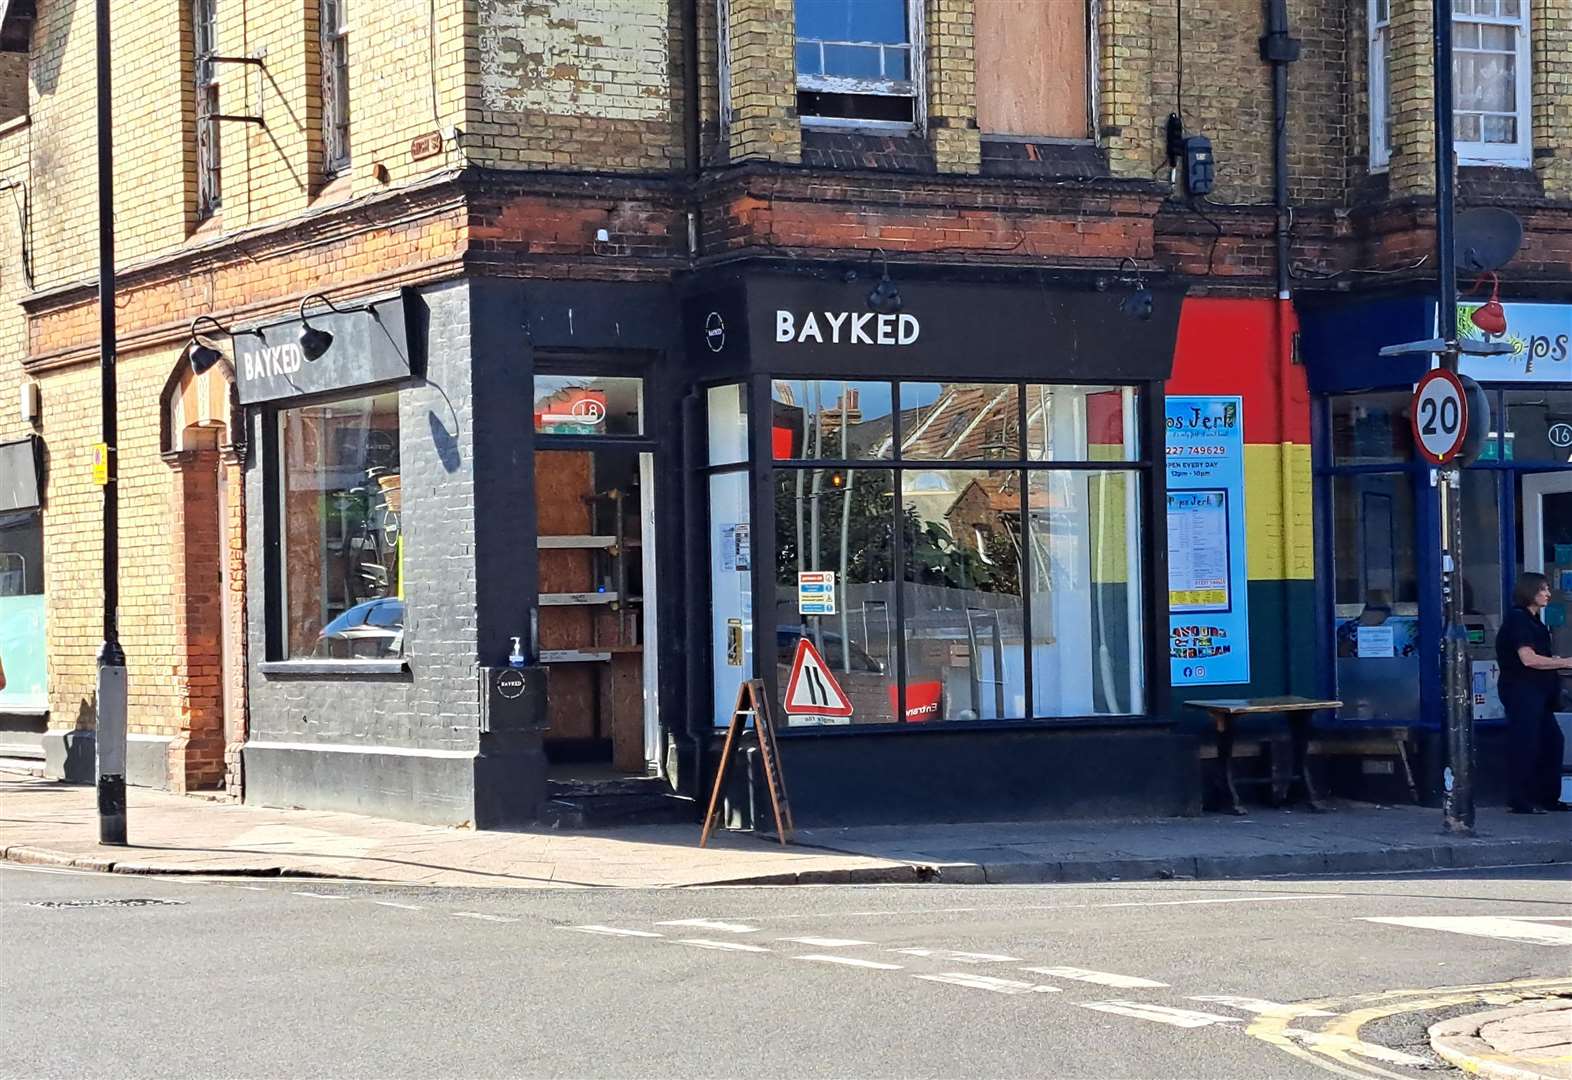 The former Bayked store in Herne Bay which was given a zero food hygiene rating last year